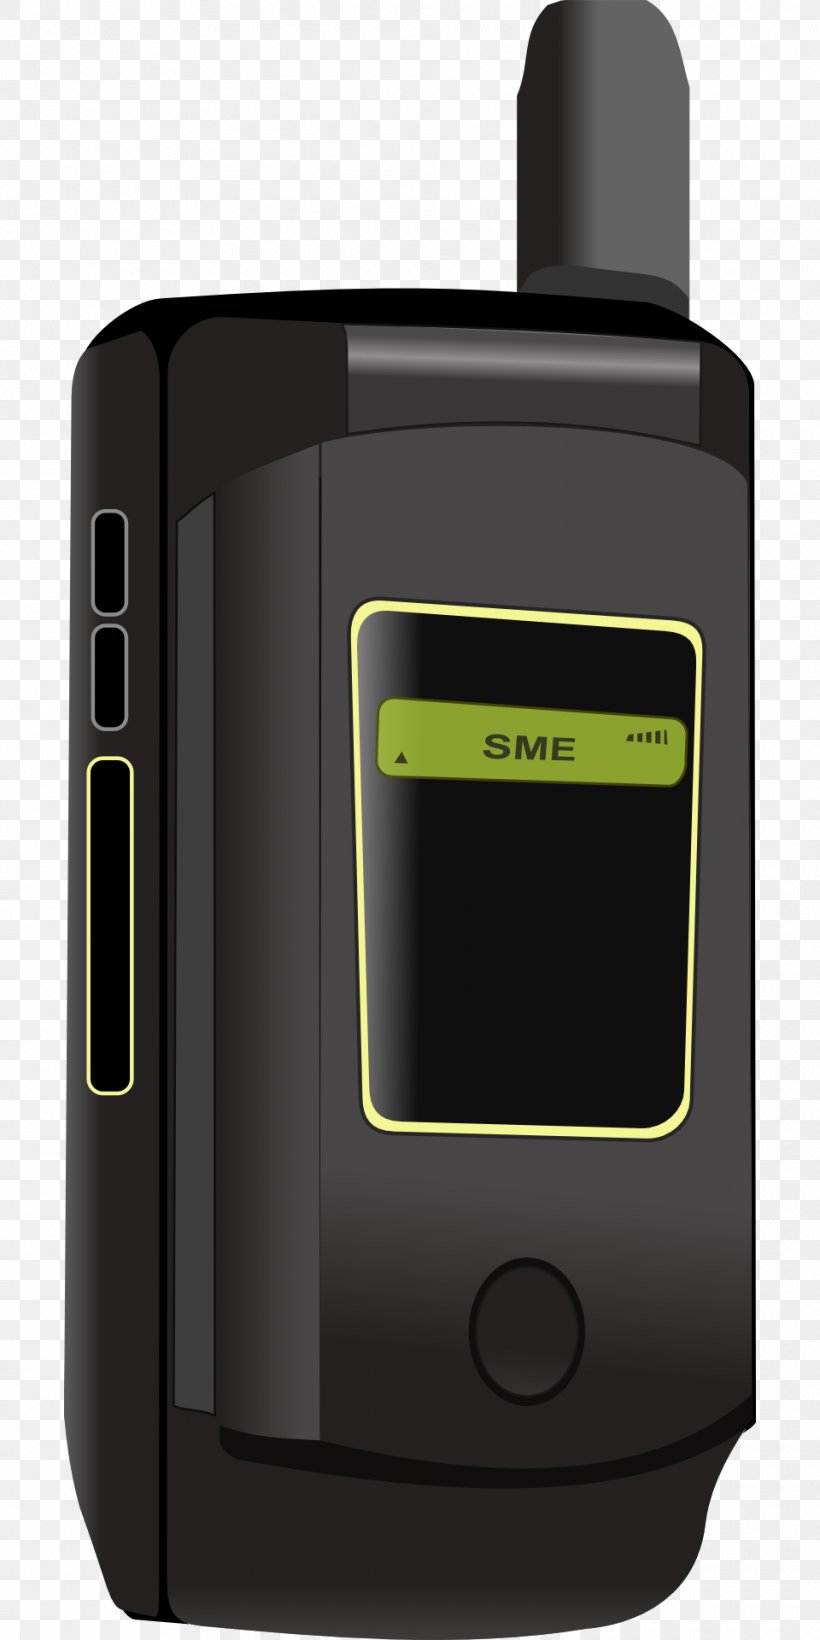 Telephone Portable Communications Device IPhone Telephony Clamshell Design, PNG, 960x1920px, Telephone, Cellular Network, Clamshell Design, Communication Device, Electronic Device Download Free